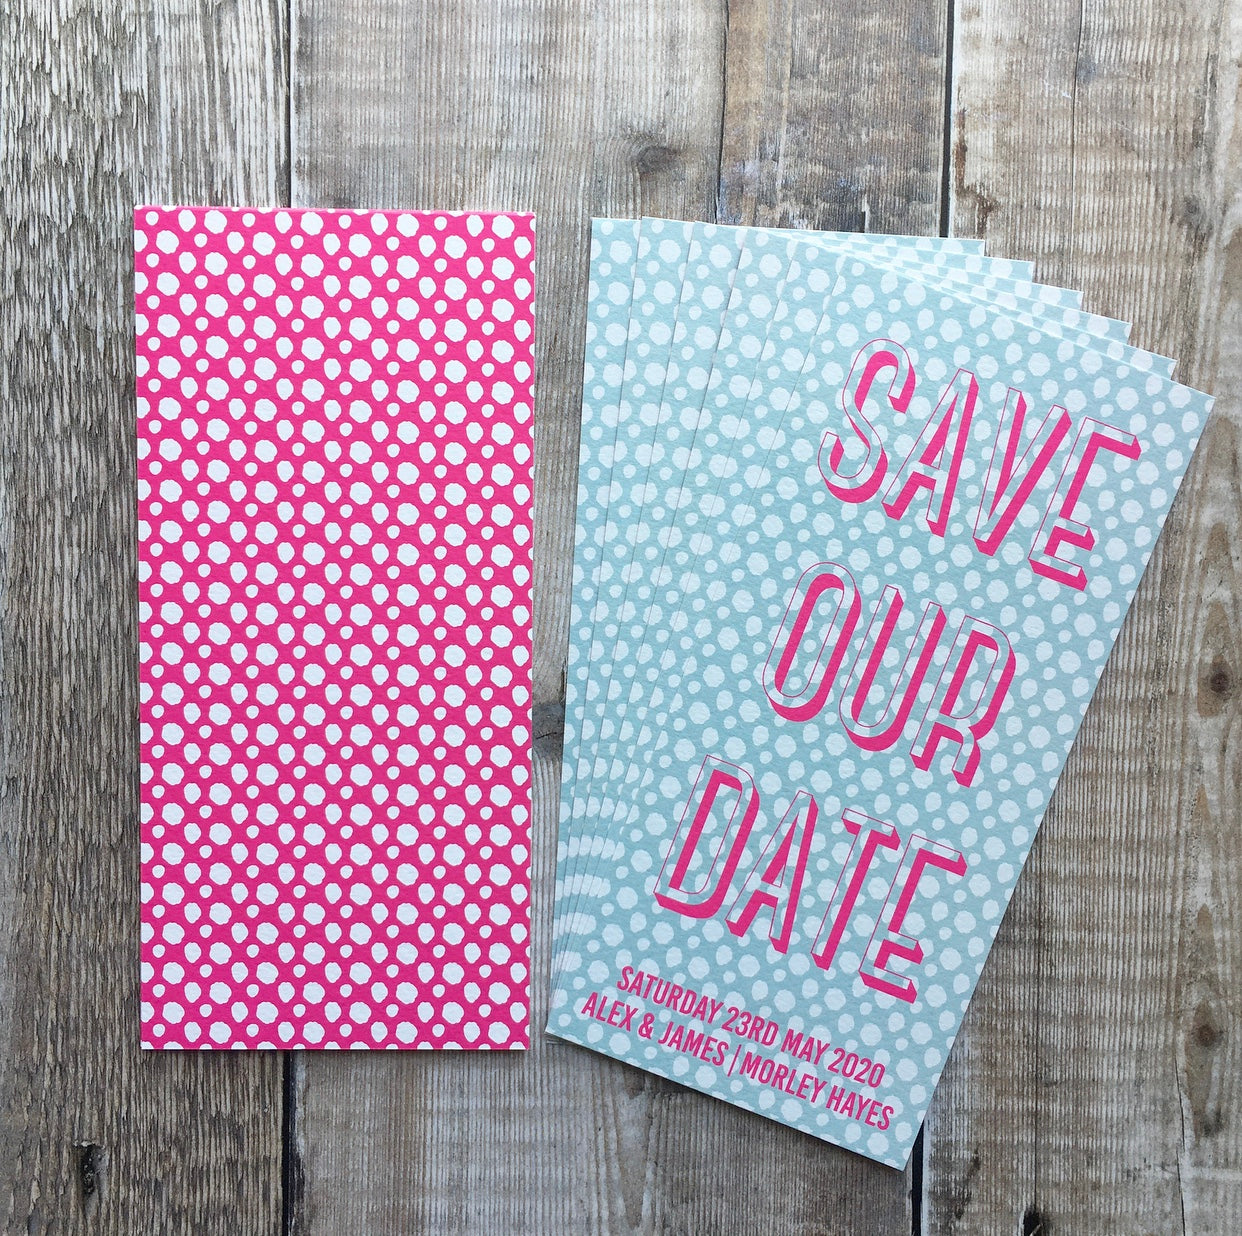 Front and back view. Back (left) has fluorescent pick background, with spotted white pattern, and no text.  Front (right) has a pale blue background, with a white spotted pattern. Text is typographic, and written in fluorescent pink. Bookmark-style wedding invitation/save the date. 99mm x 210mm.